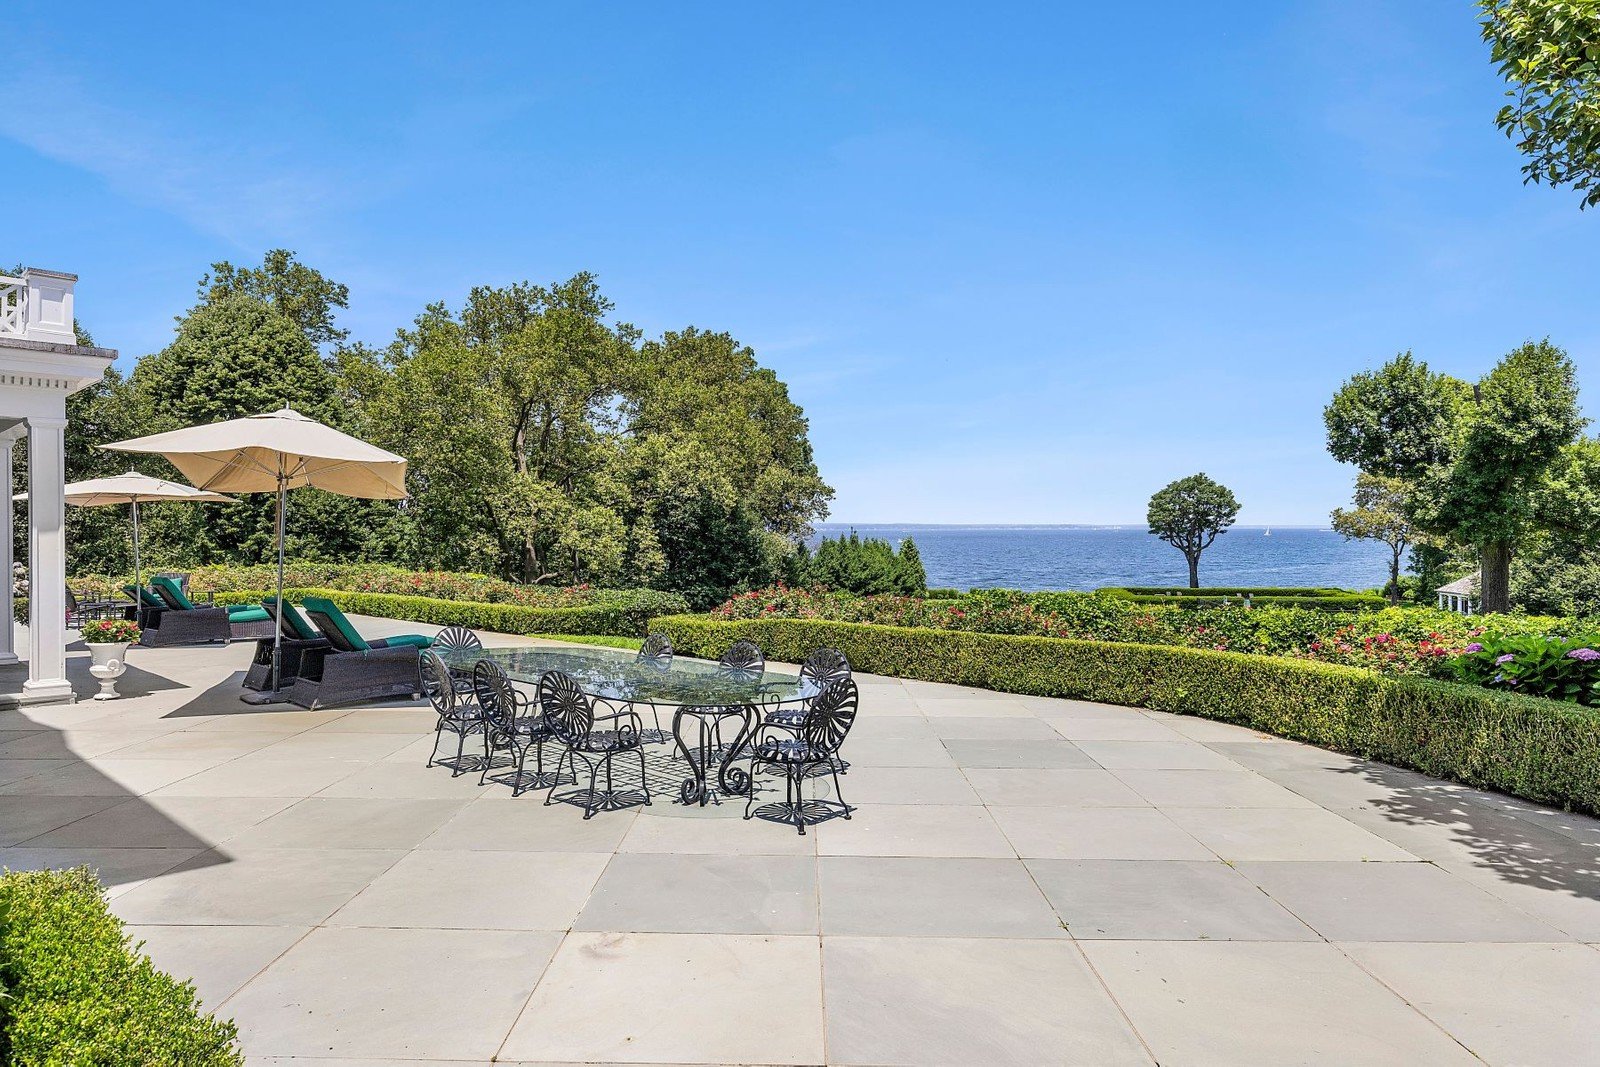 Francis York Daniel Gale Sothebys The Lindens Timeless Long Island Estate Once Home to the Famed Bootleggers, the Vanderbilts, and Rockstars 16.jpeg